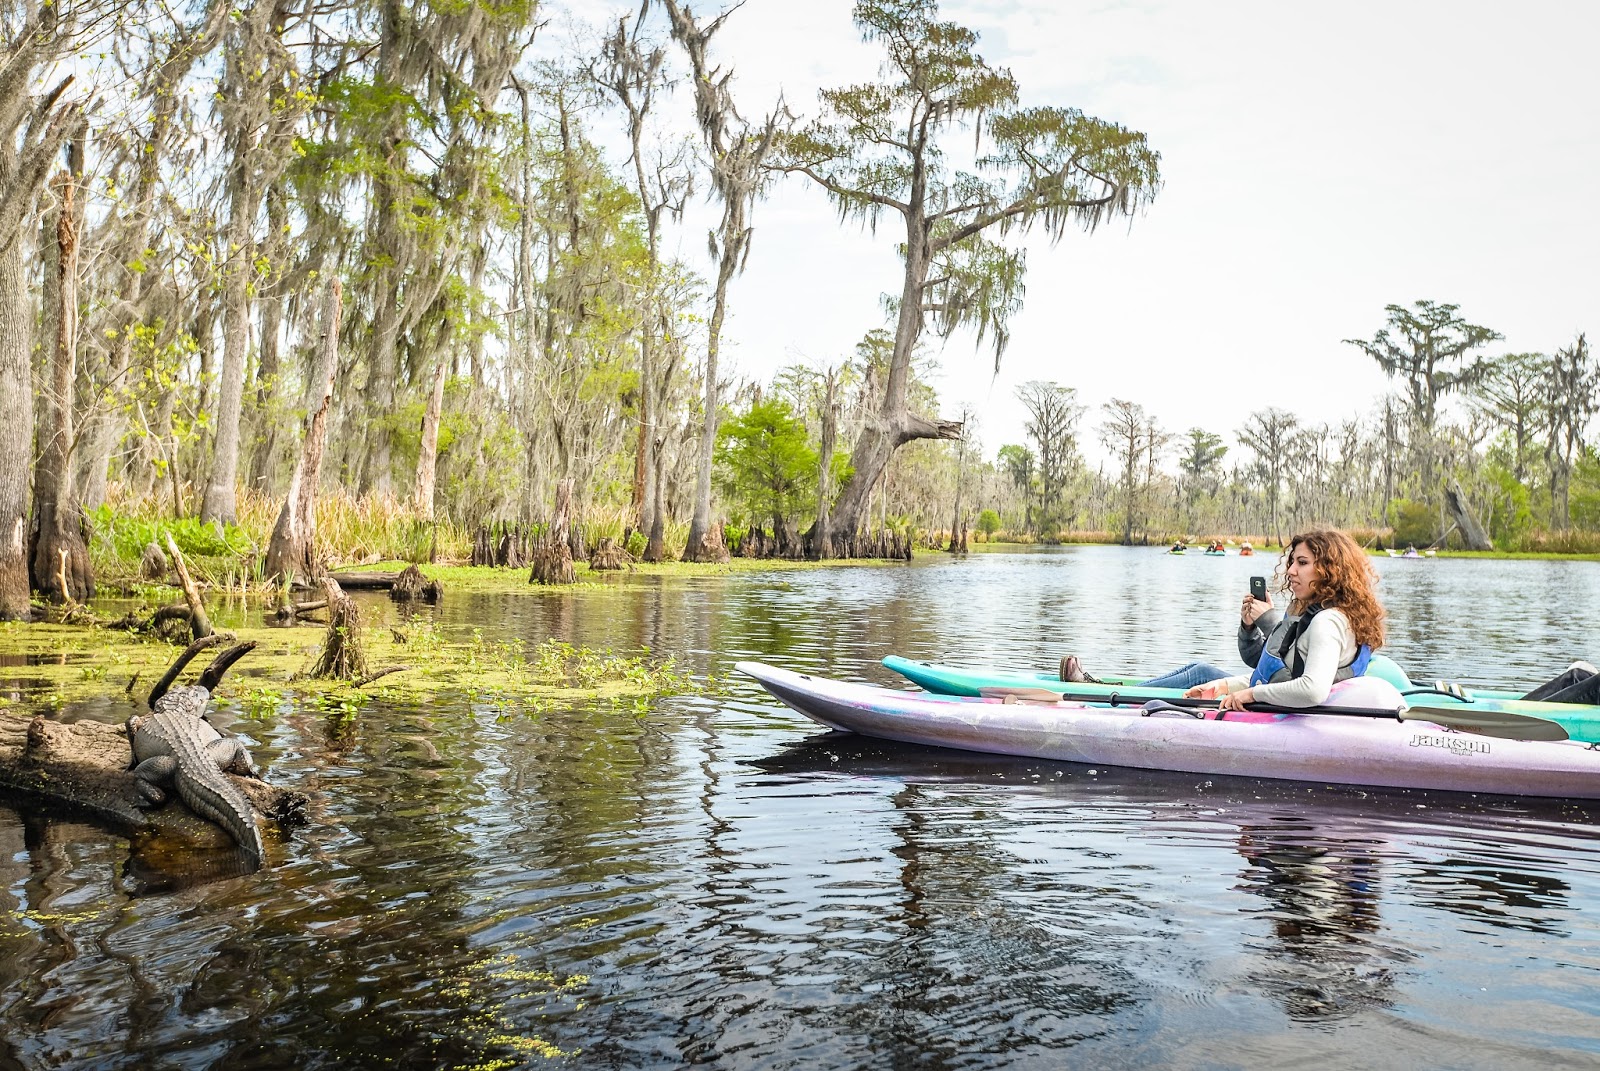 A woman taking a picture of an alligator from her kayak.